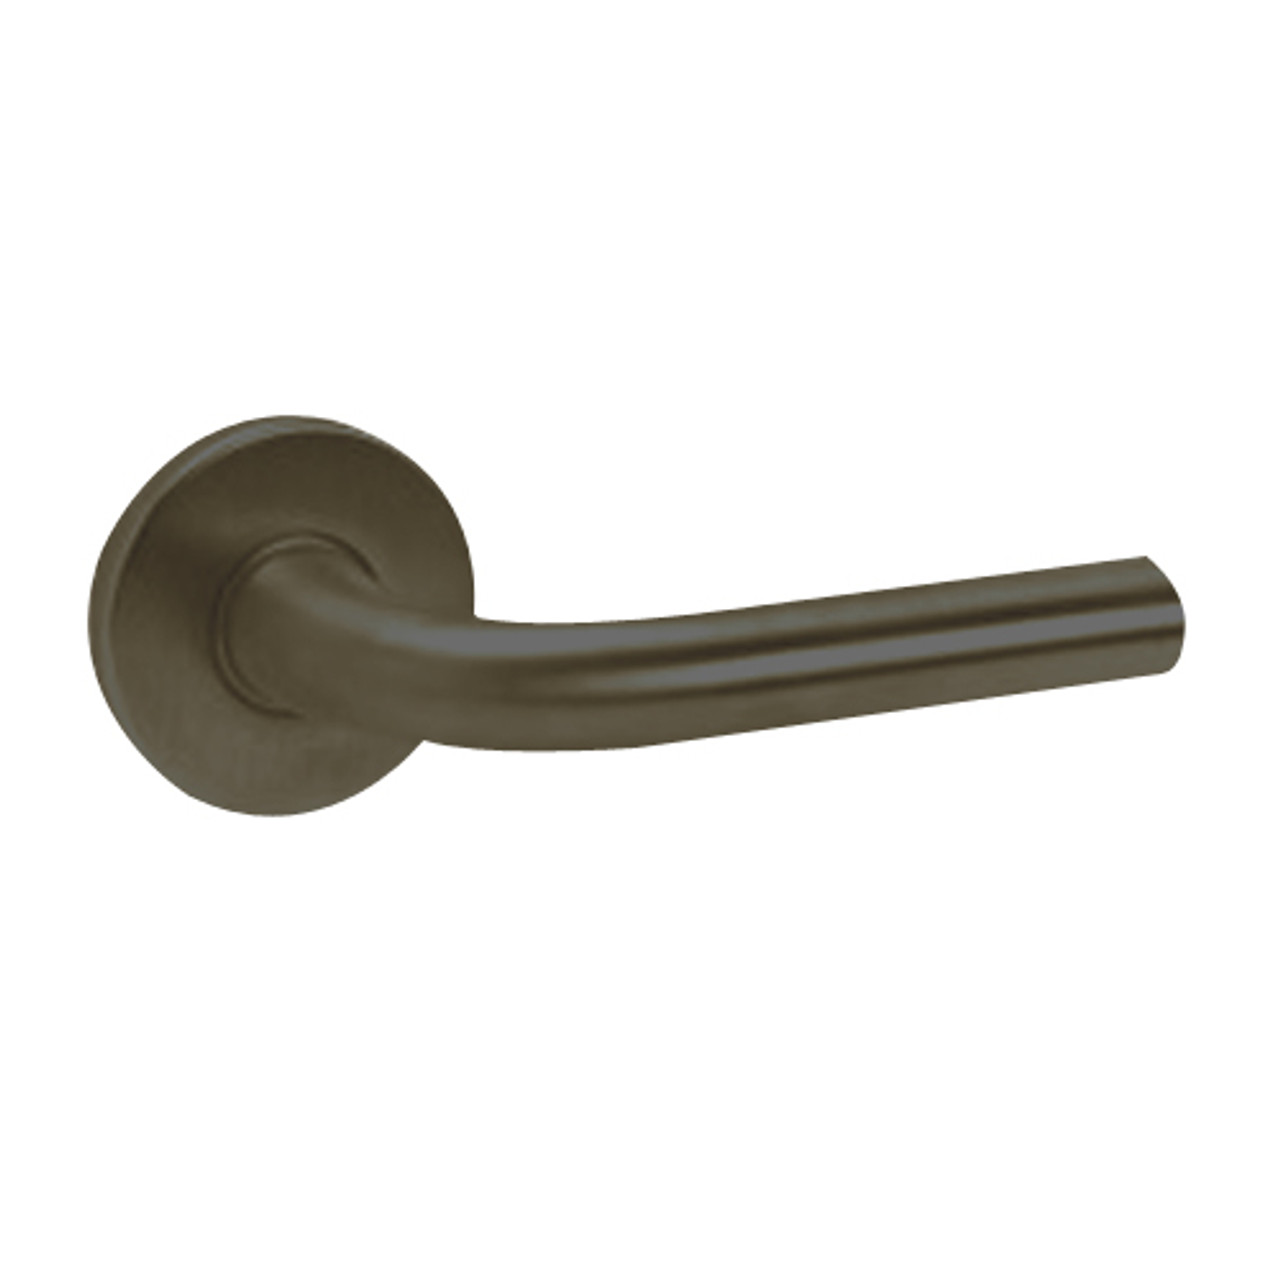 ML2051-RWF-613-M31 Corbin Russwin ML2000 Series Mortise Office Trim Pack with Regis Lever in Oil Rubbed Bronze